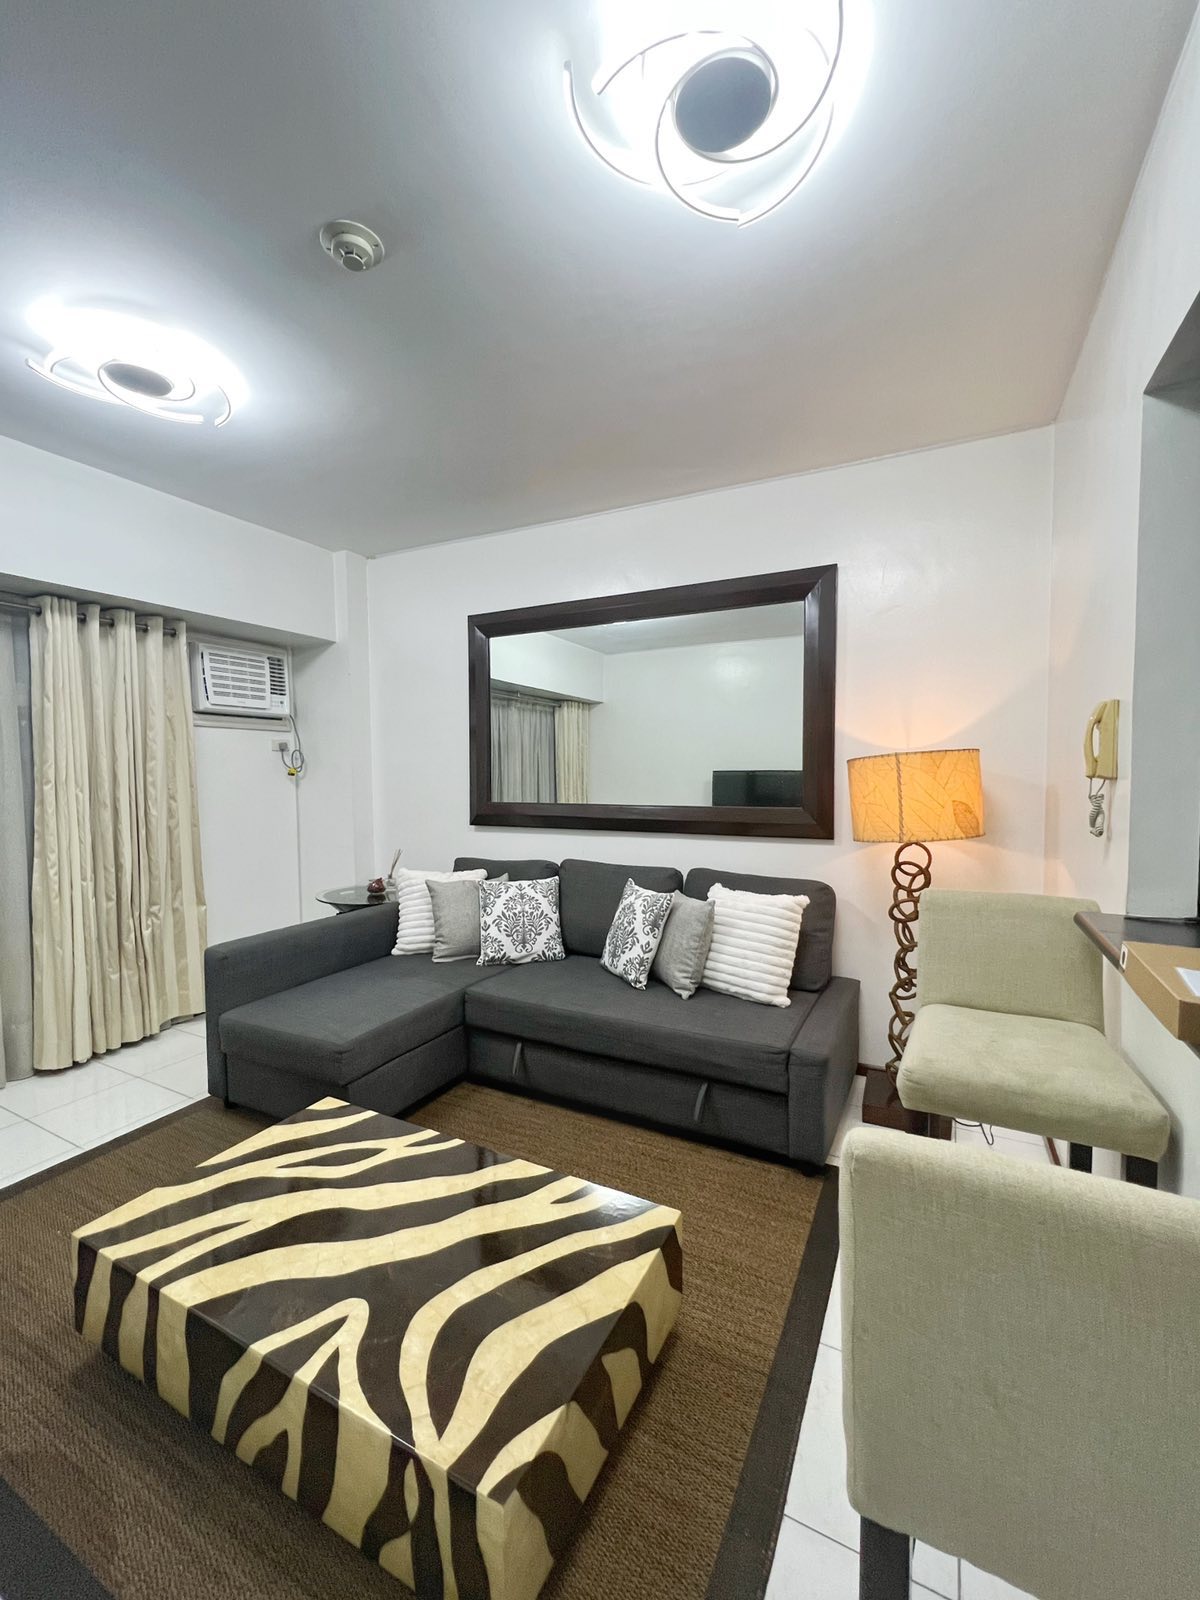 1 Bedroom Condominium for Lease is Located at Two Serendra Taguig